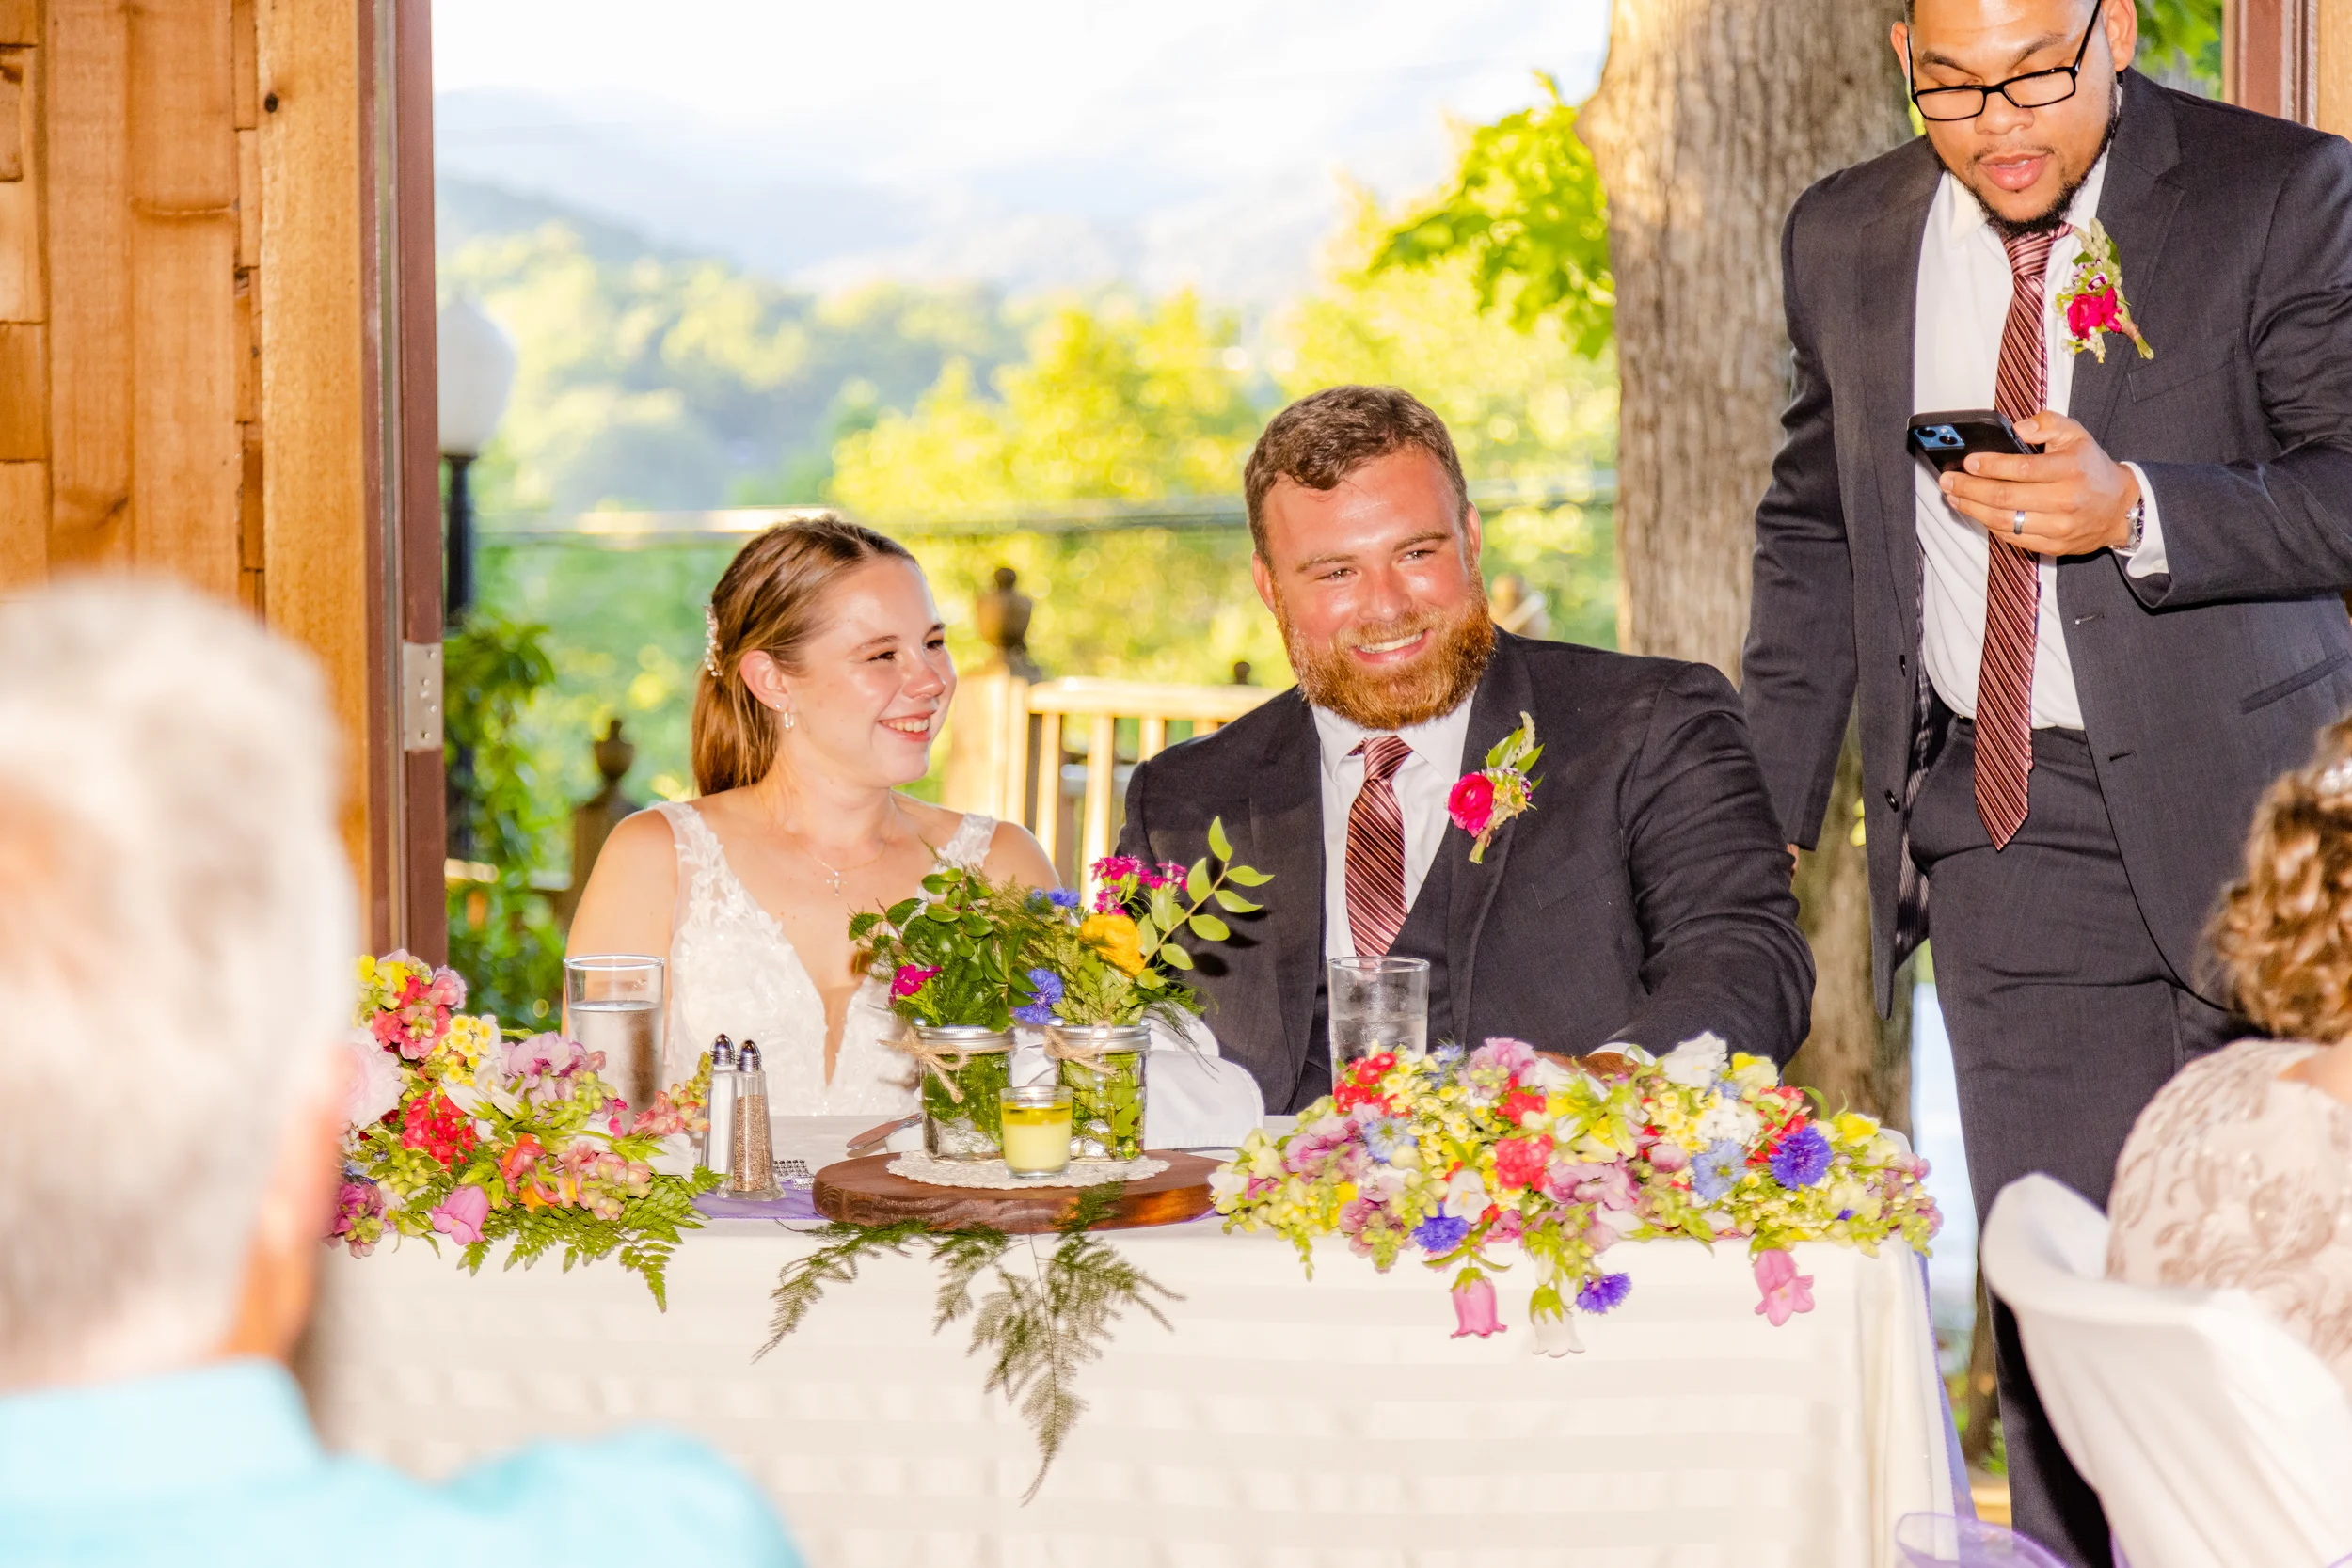 Wedding couple at table